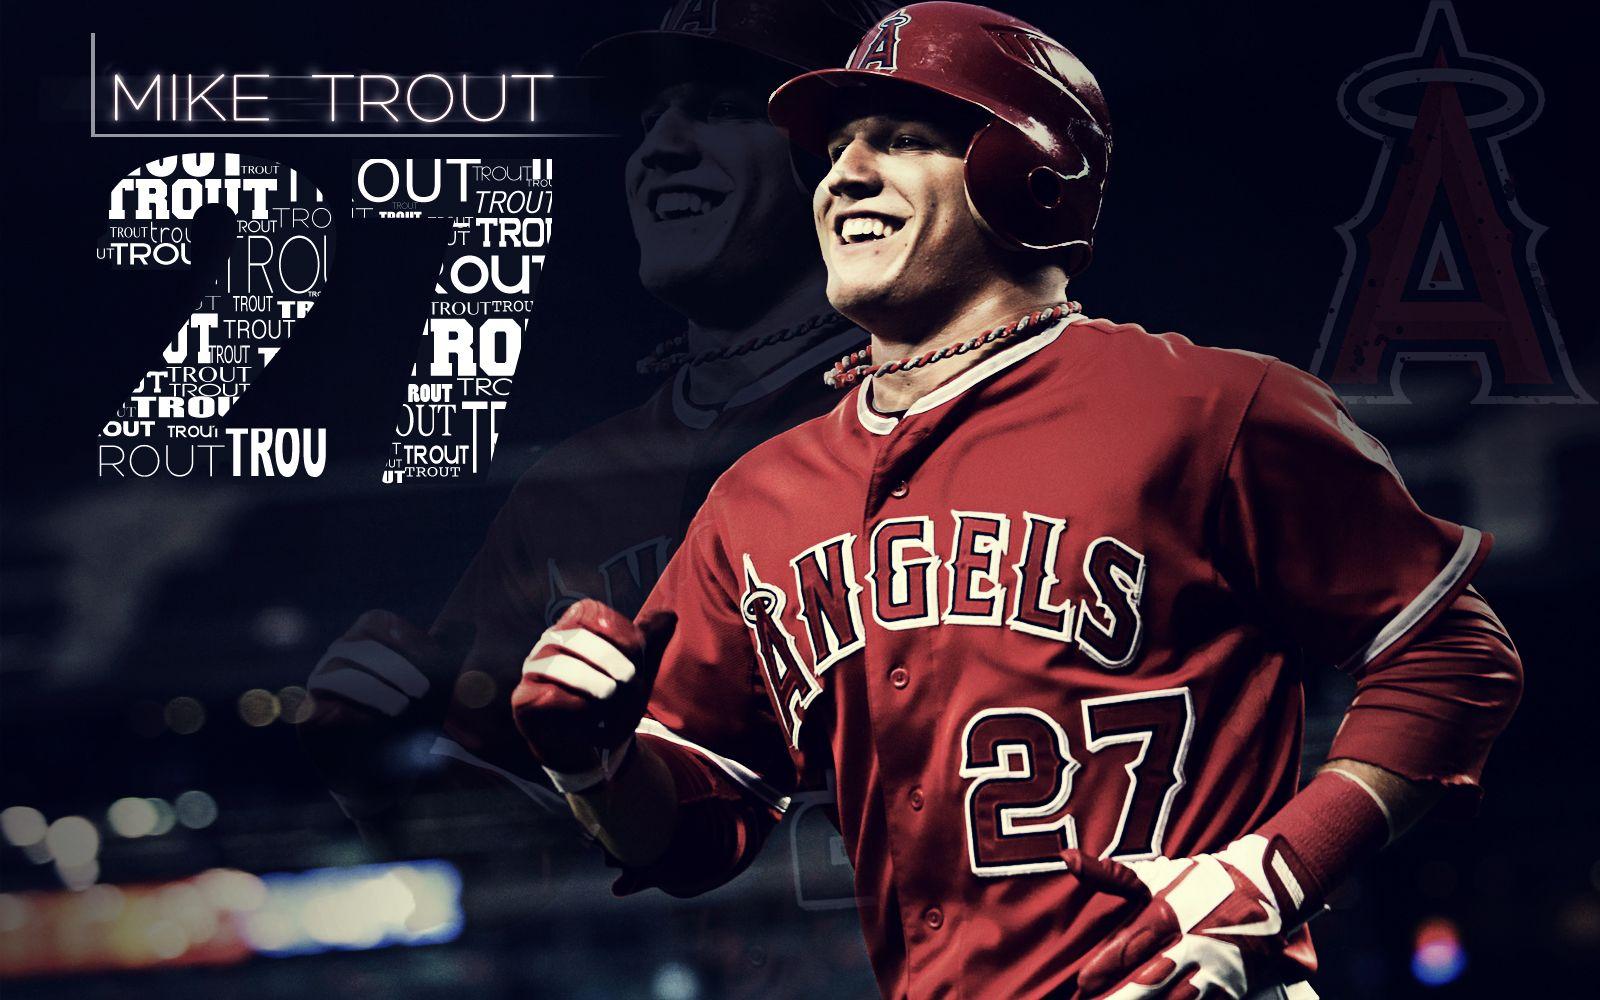 Mike Trout Wallpaper. mike trout los angeles angels wallpaper